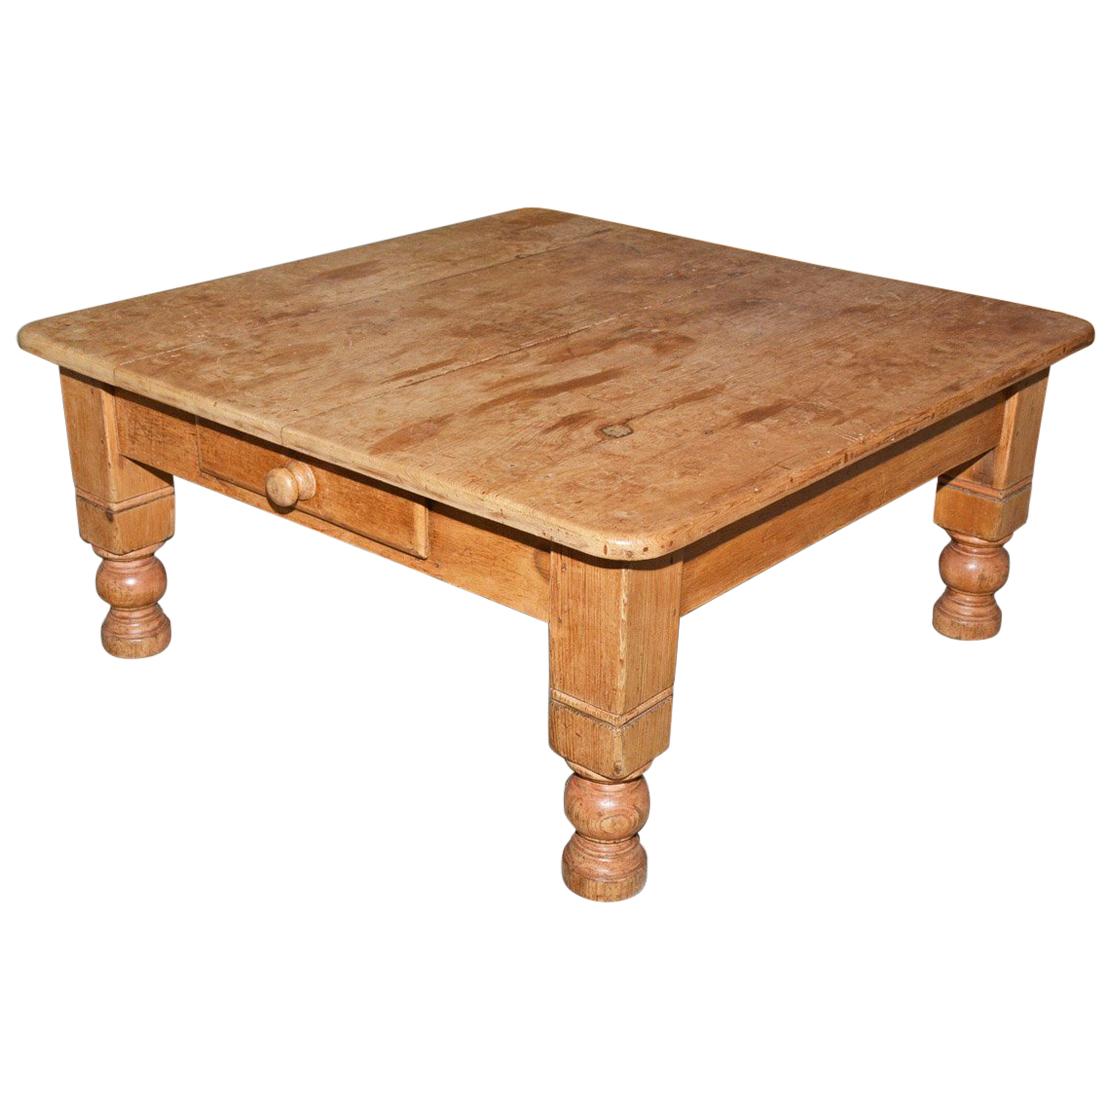 Country-Style Plank Top Pine Coffee Table